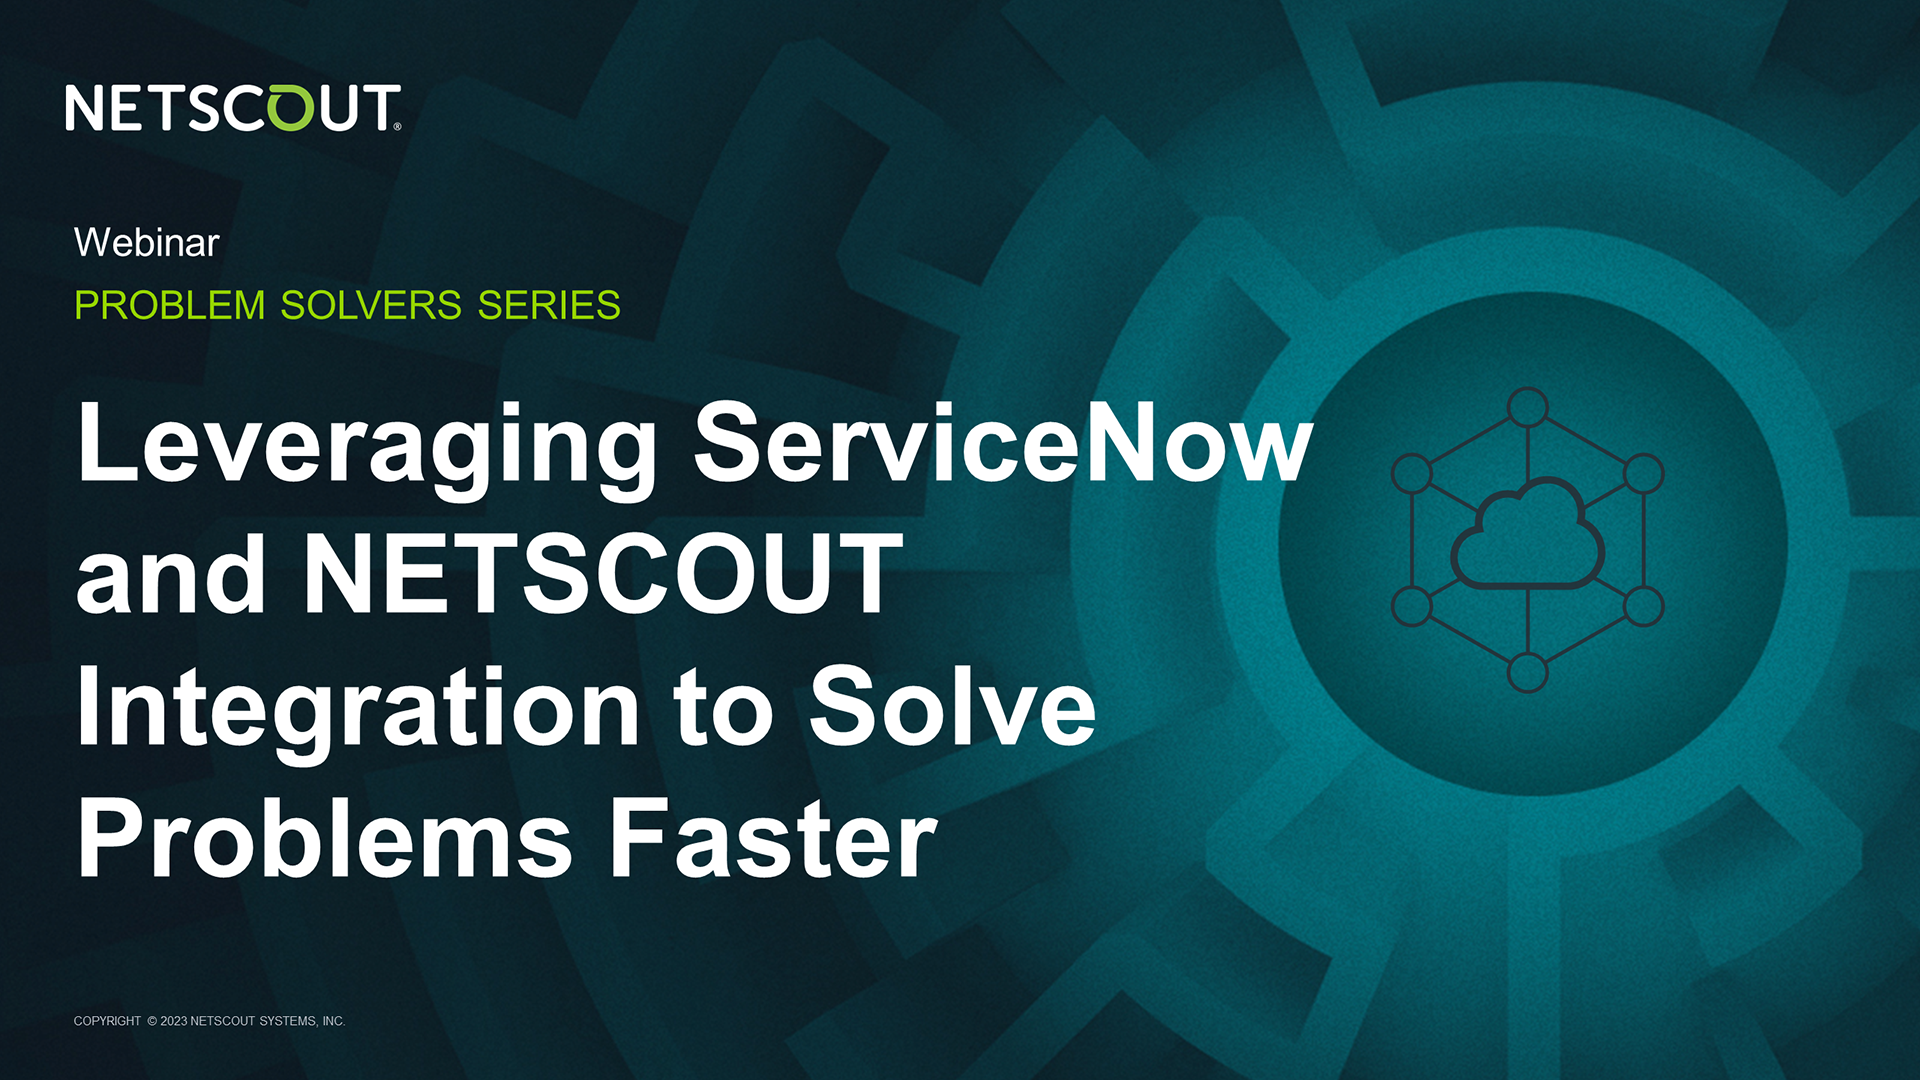 Leveraging ServiceNow and NETSCOUT Integration to Solve Problems Faster